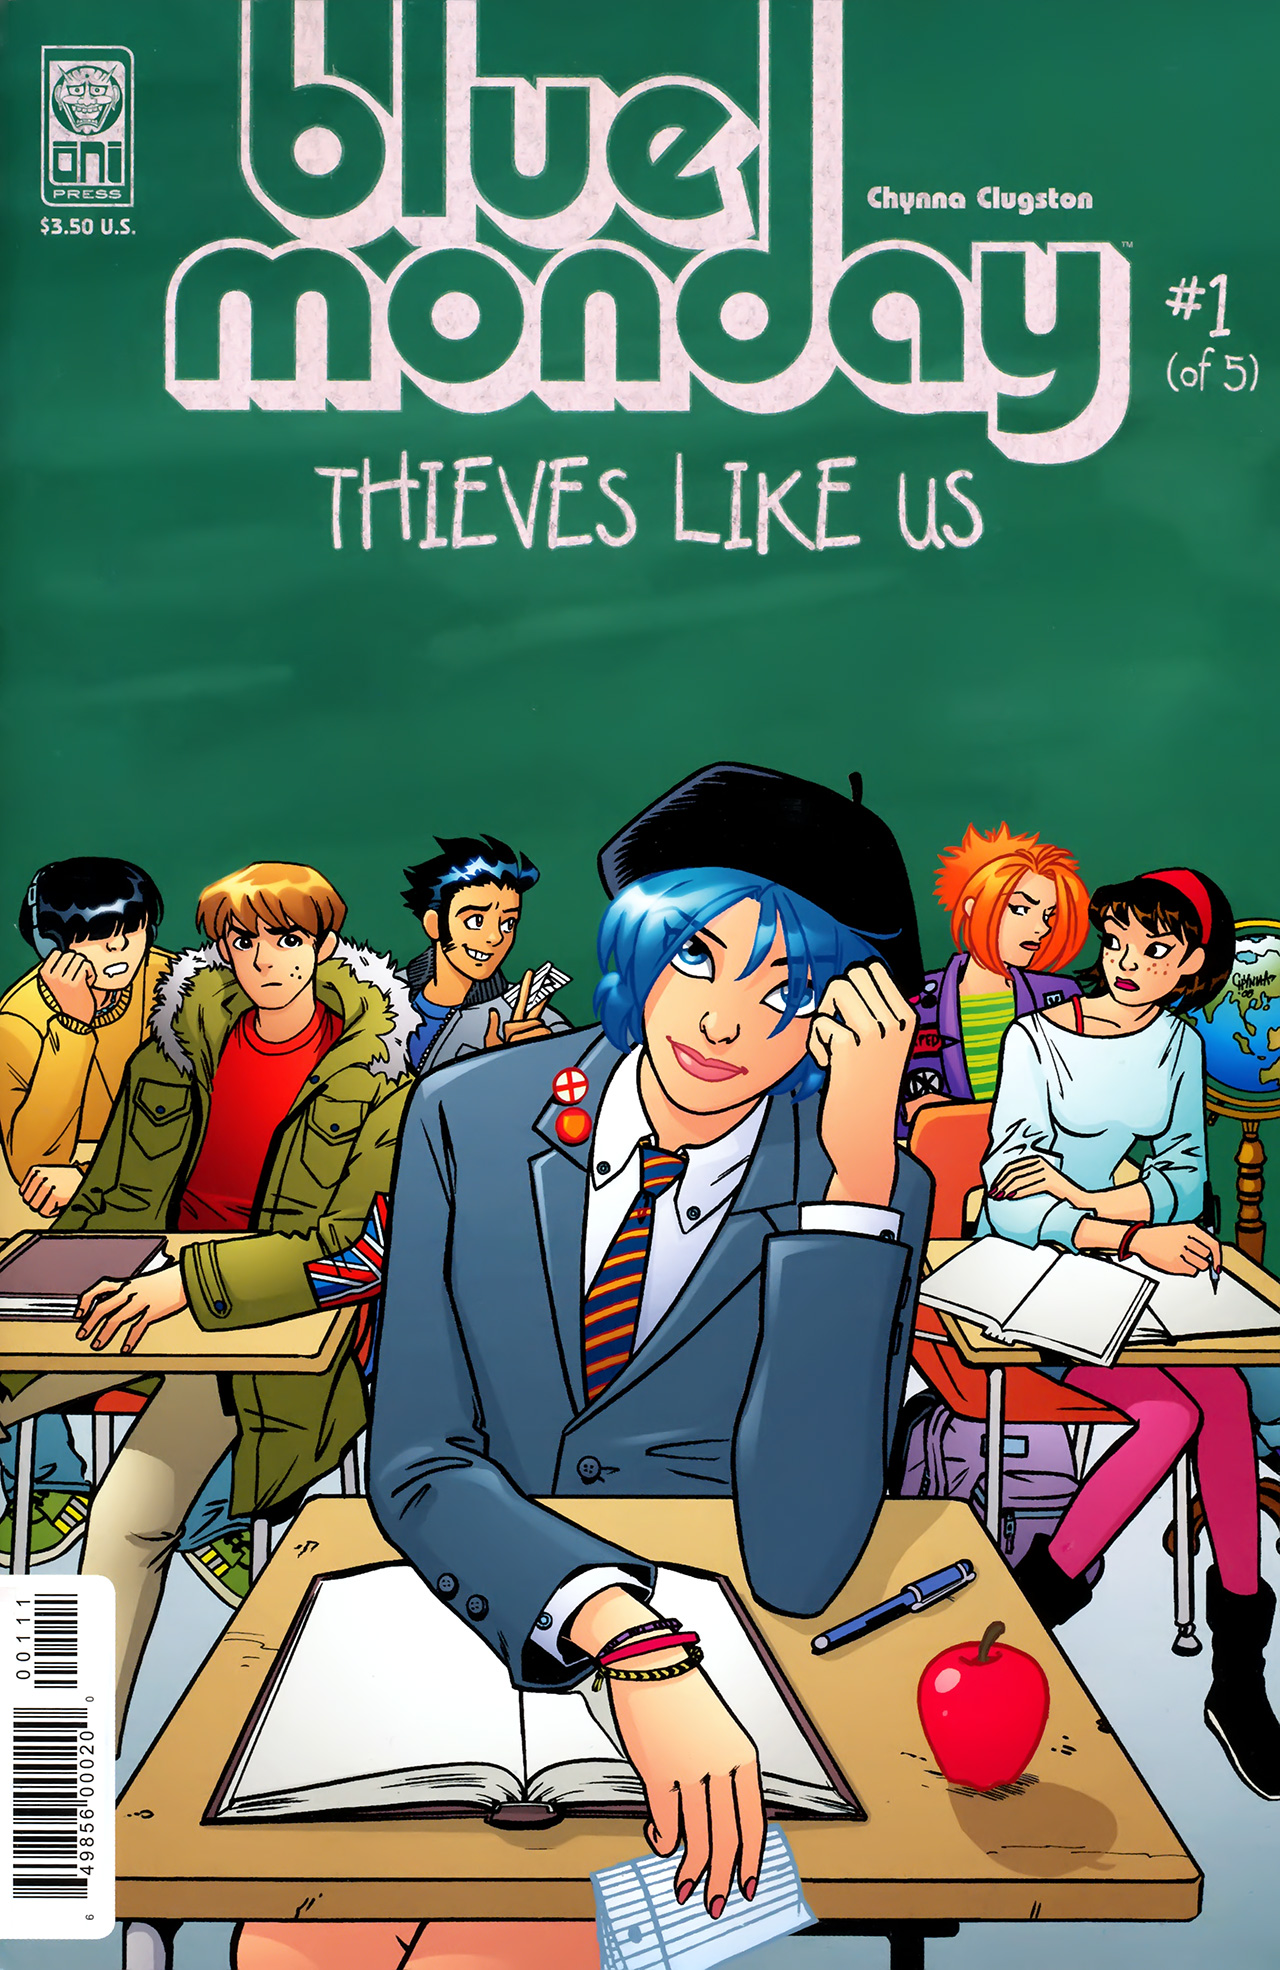 Read online Blue Monday: Thieves Like Us comic -  Issue # Full - 1